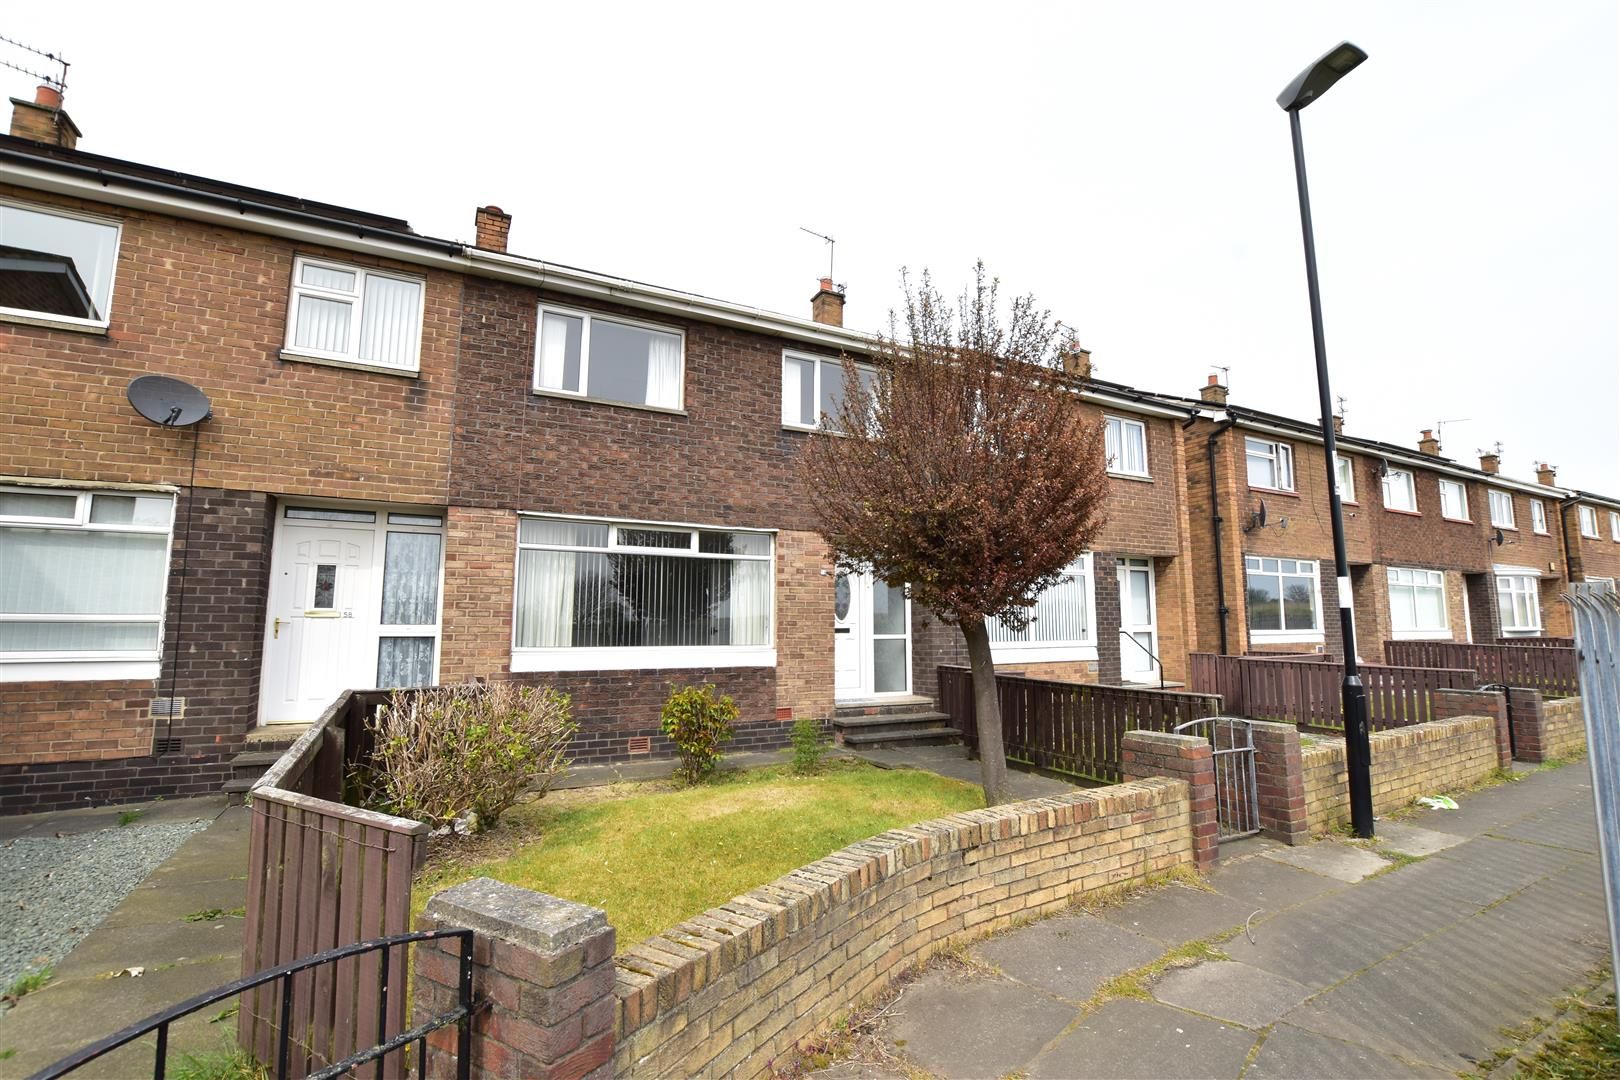 3 bed terraced house for sale in Eversley Crescent, Carley Hill ...